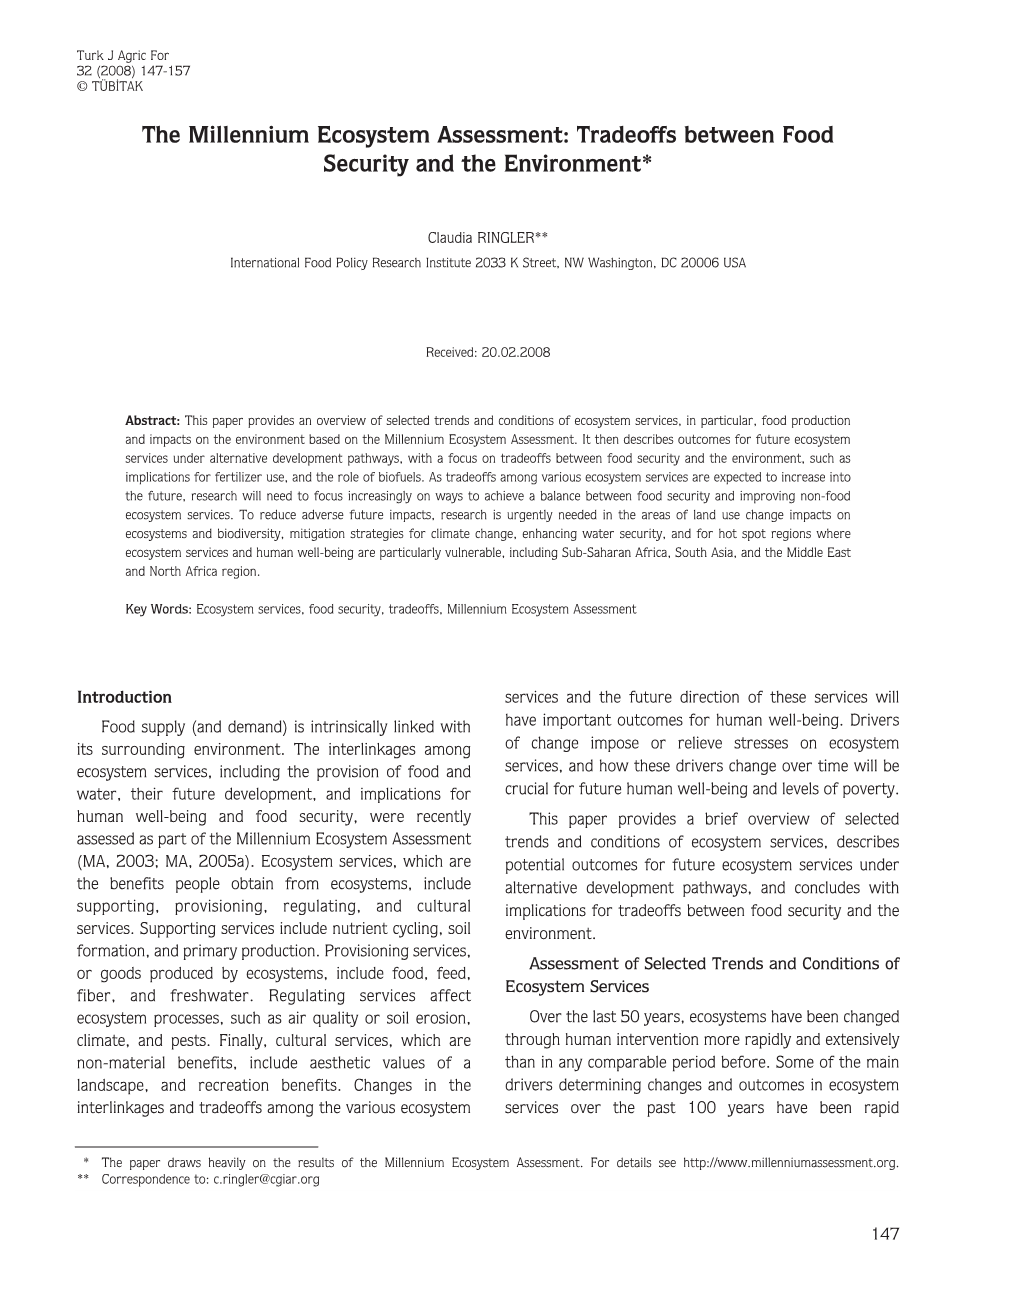 The Millennium Ecosystem Assessment: Tradeoffs Between Food Security and the Environment*